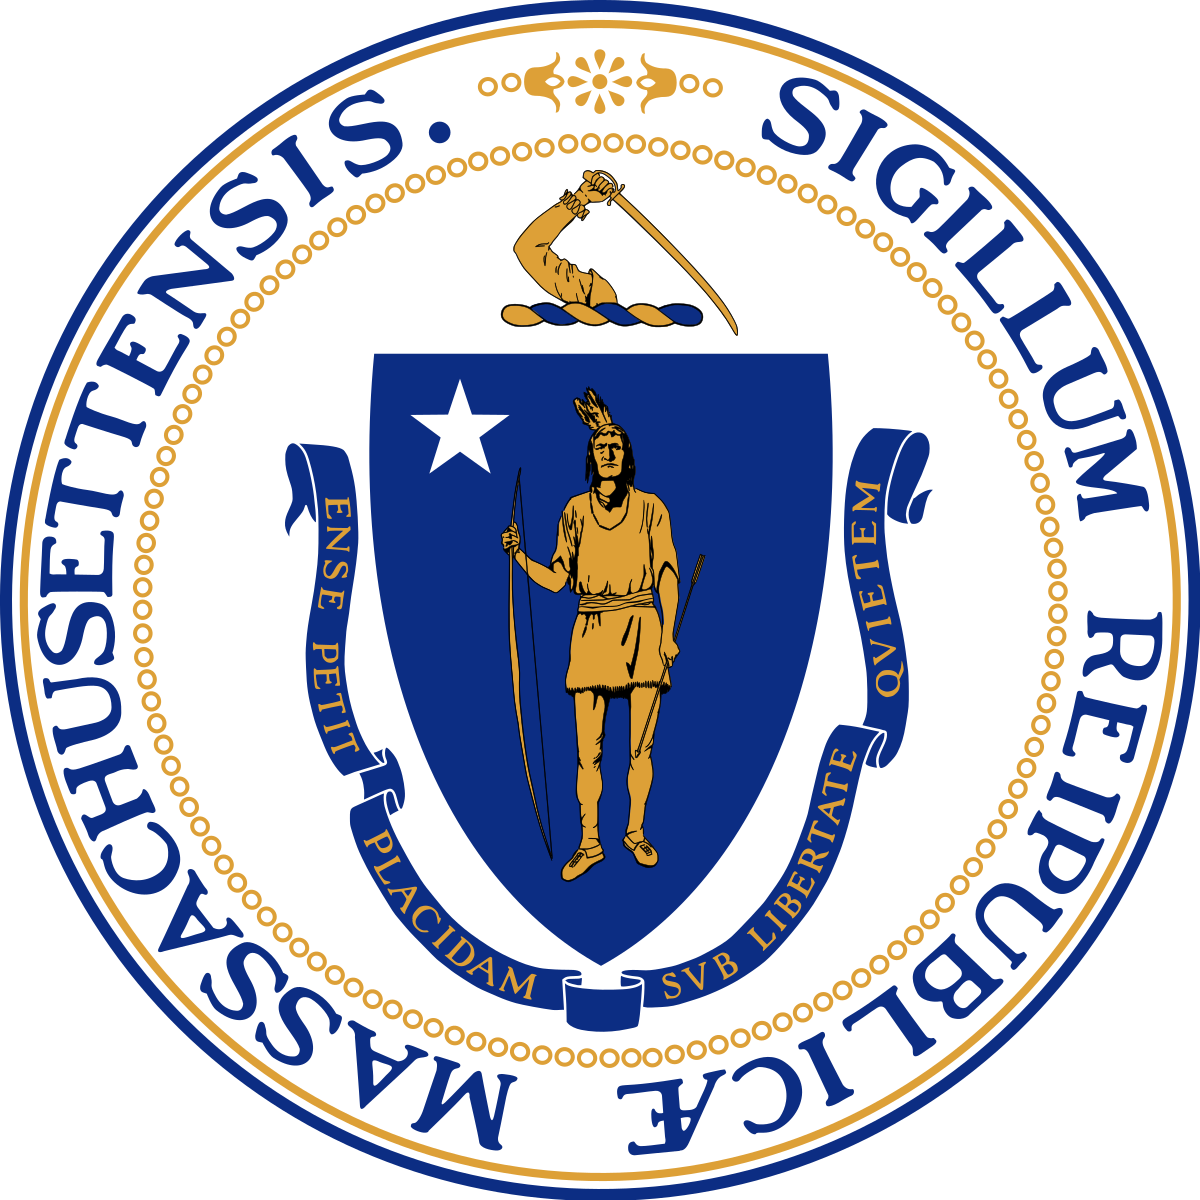 State seal or state flag of Massachusetts.